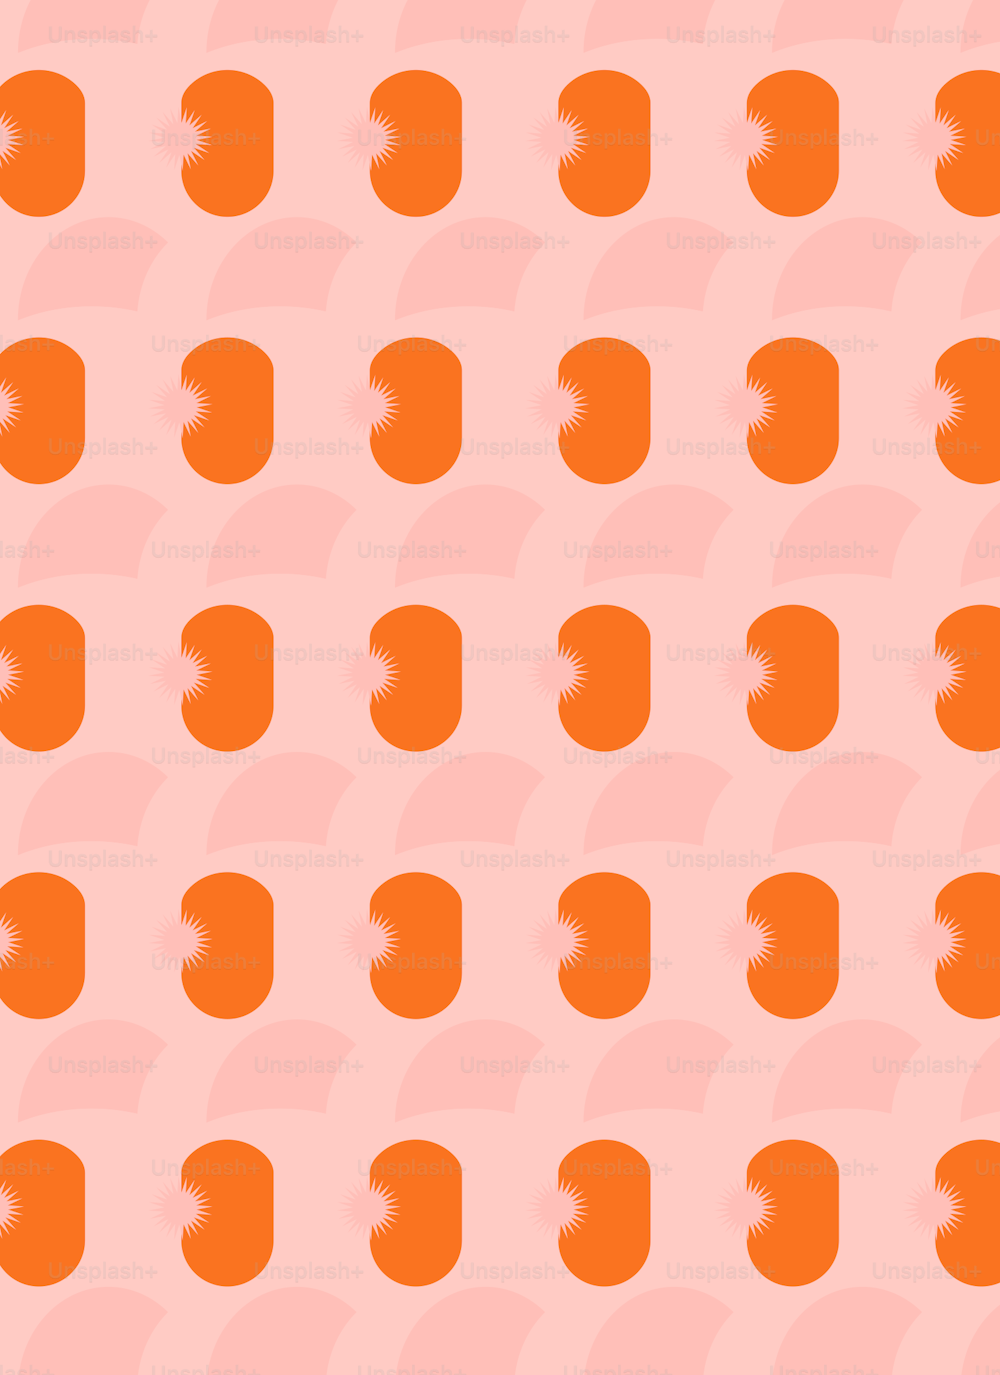 a pattern of orange circles on a gray background